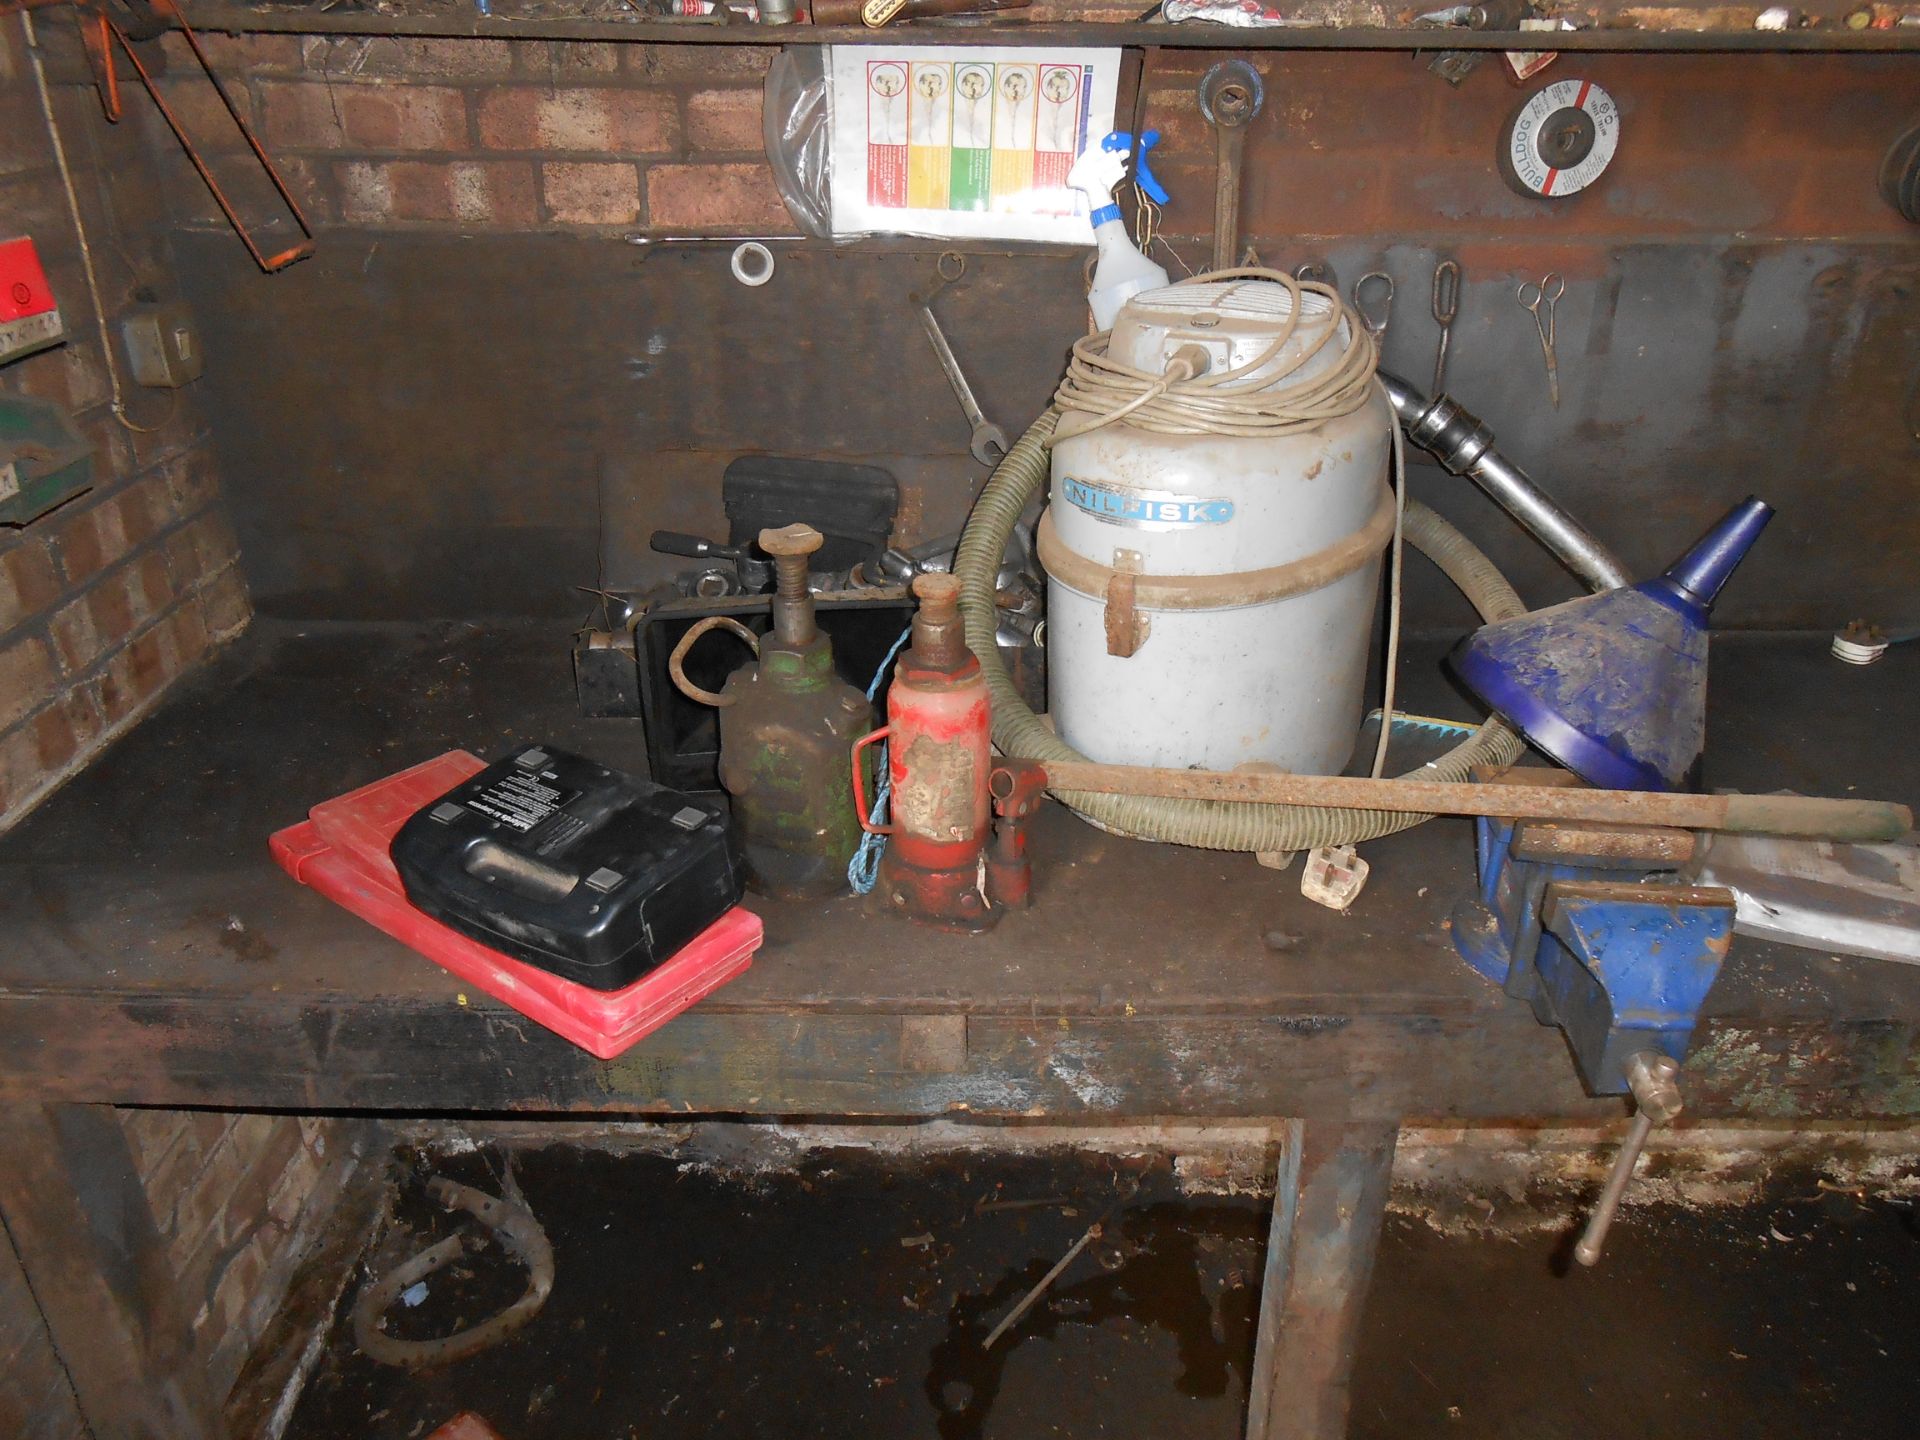 Work Bench Contents - Image 7 of 8